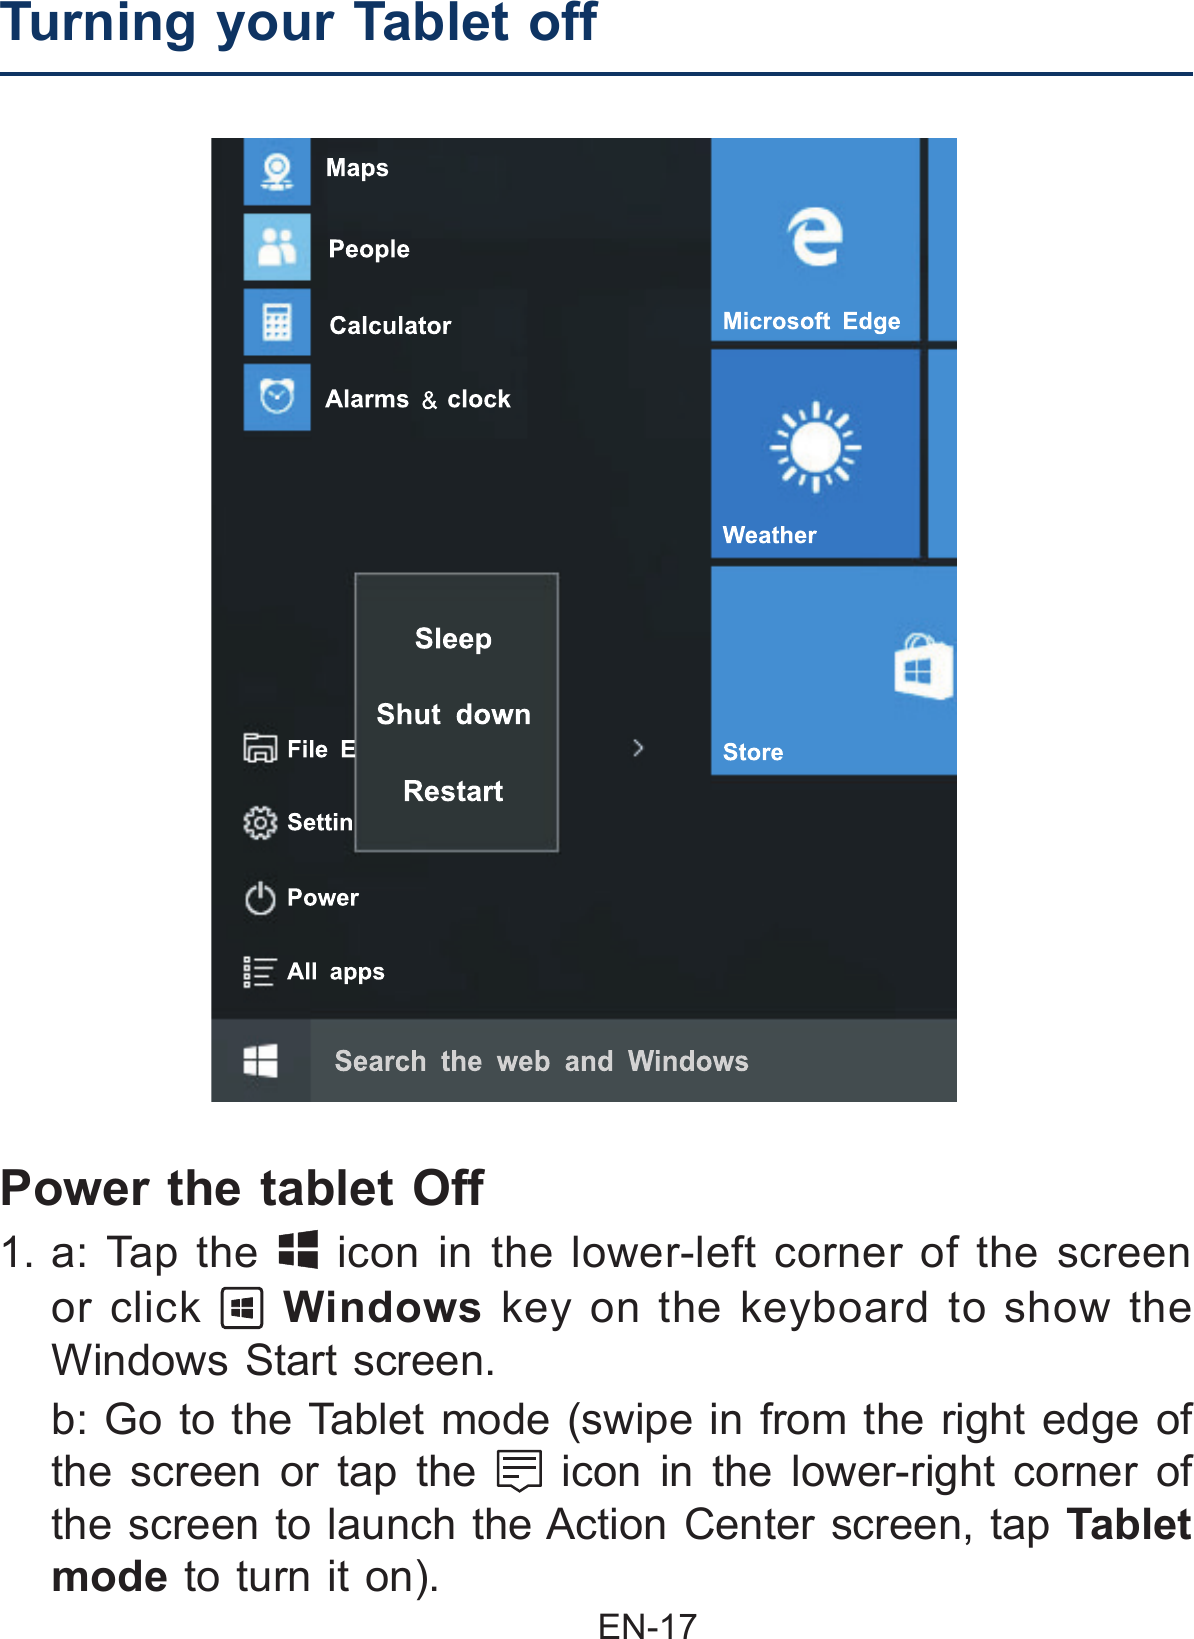                                                EN-17 Power the tablet Off 1. a: Tap the   icon in the lower-left corner of the screen or click   Windows key on the keyboard to show the Windows Start screen.  b: Go to the Tablet mode (swipe in from the right edge of the screen or tap the   icon in the lower-right corner of the screen to launch the Action Center screen, tap Tablet mode to turn it on).Turning your Tablet off